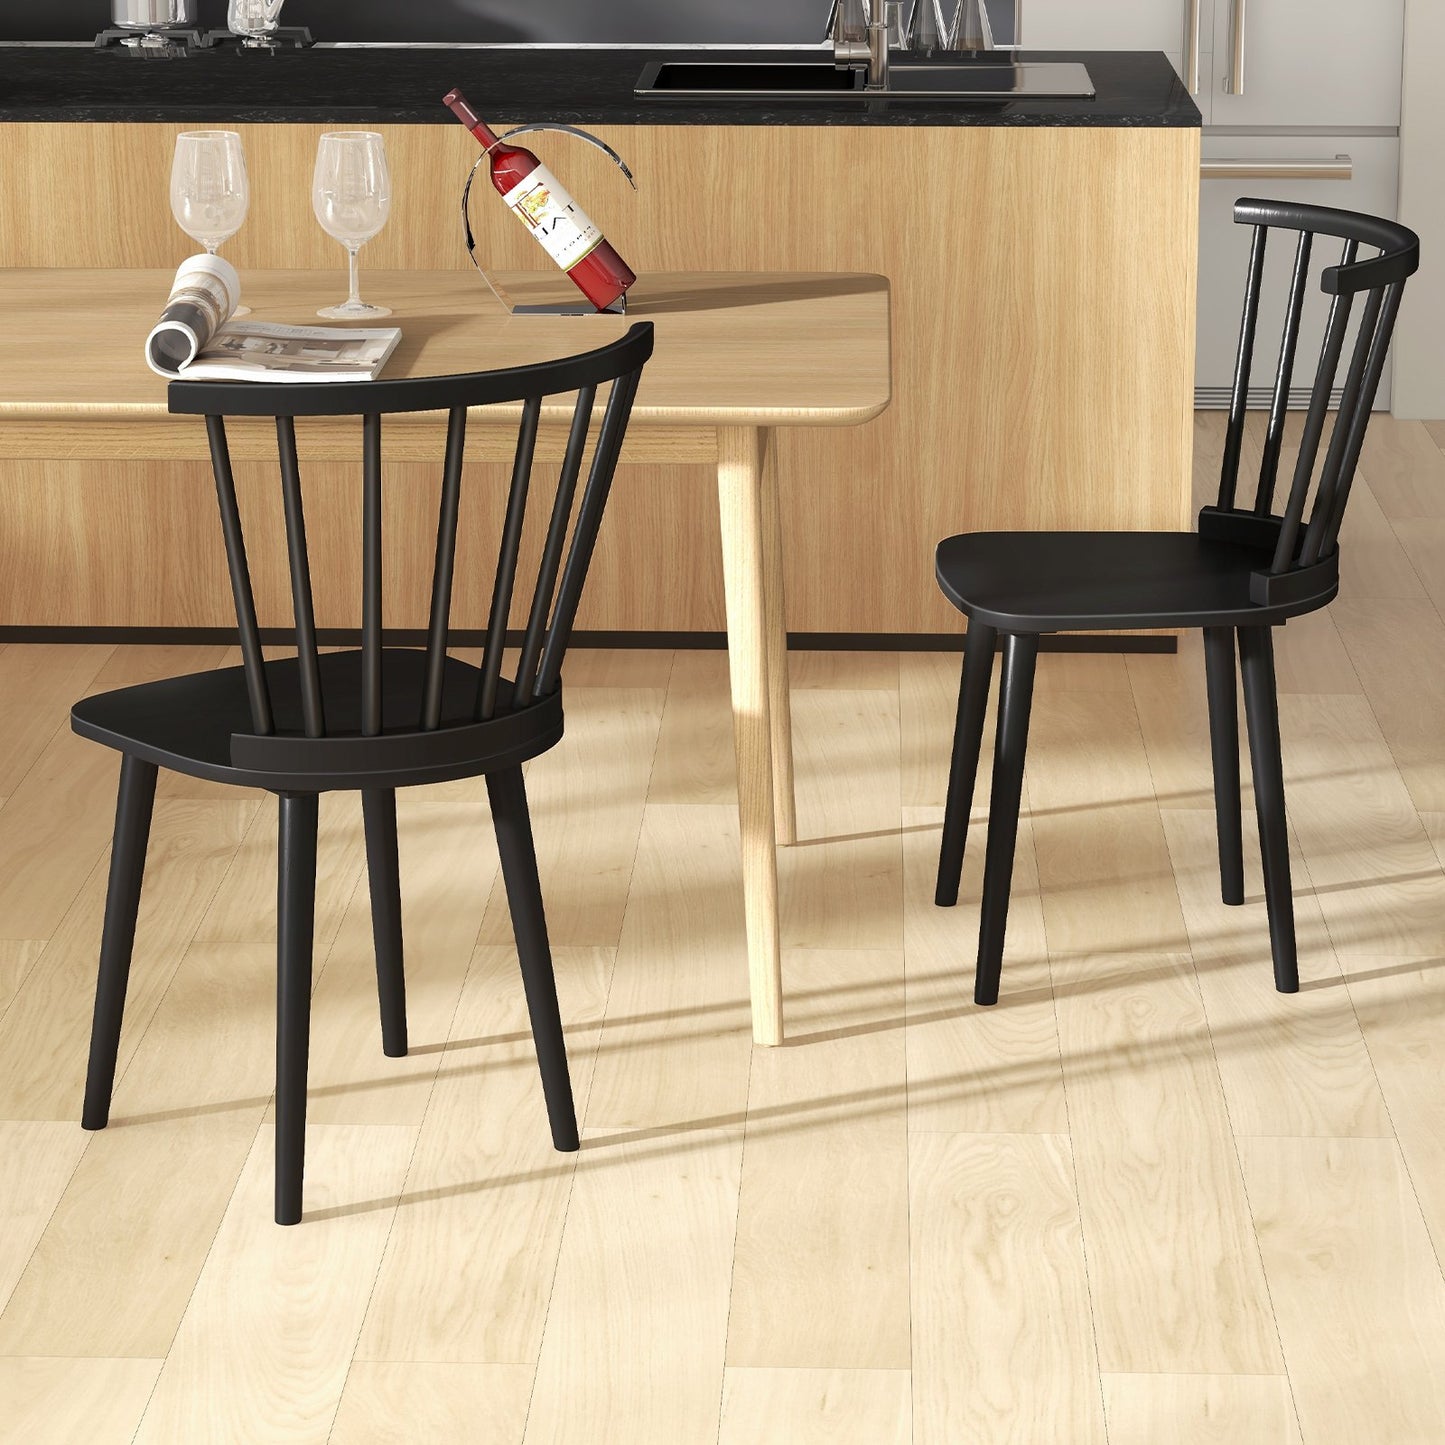 Windsor Dining Chairs Set of 2 Rubber Wood Kitchen Chairs with Spindle Back, Black